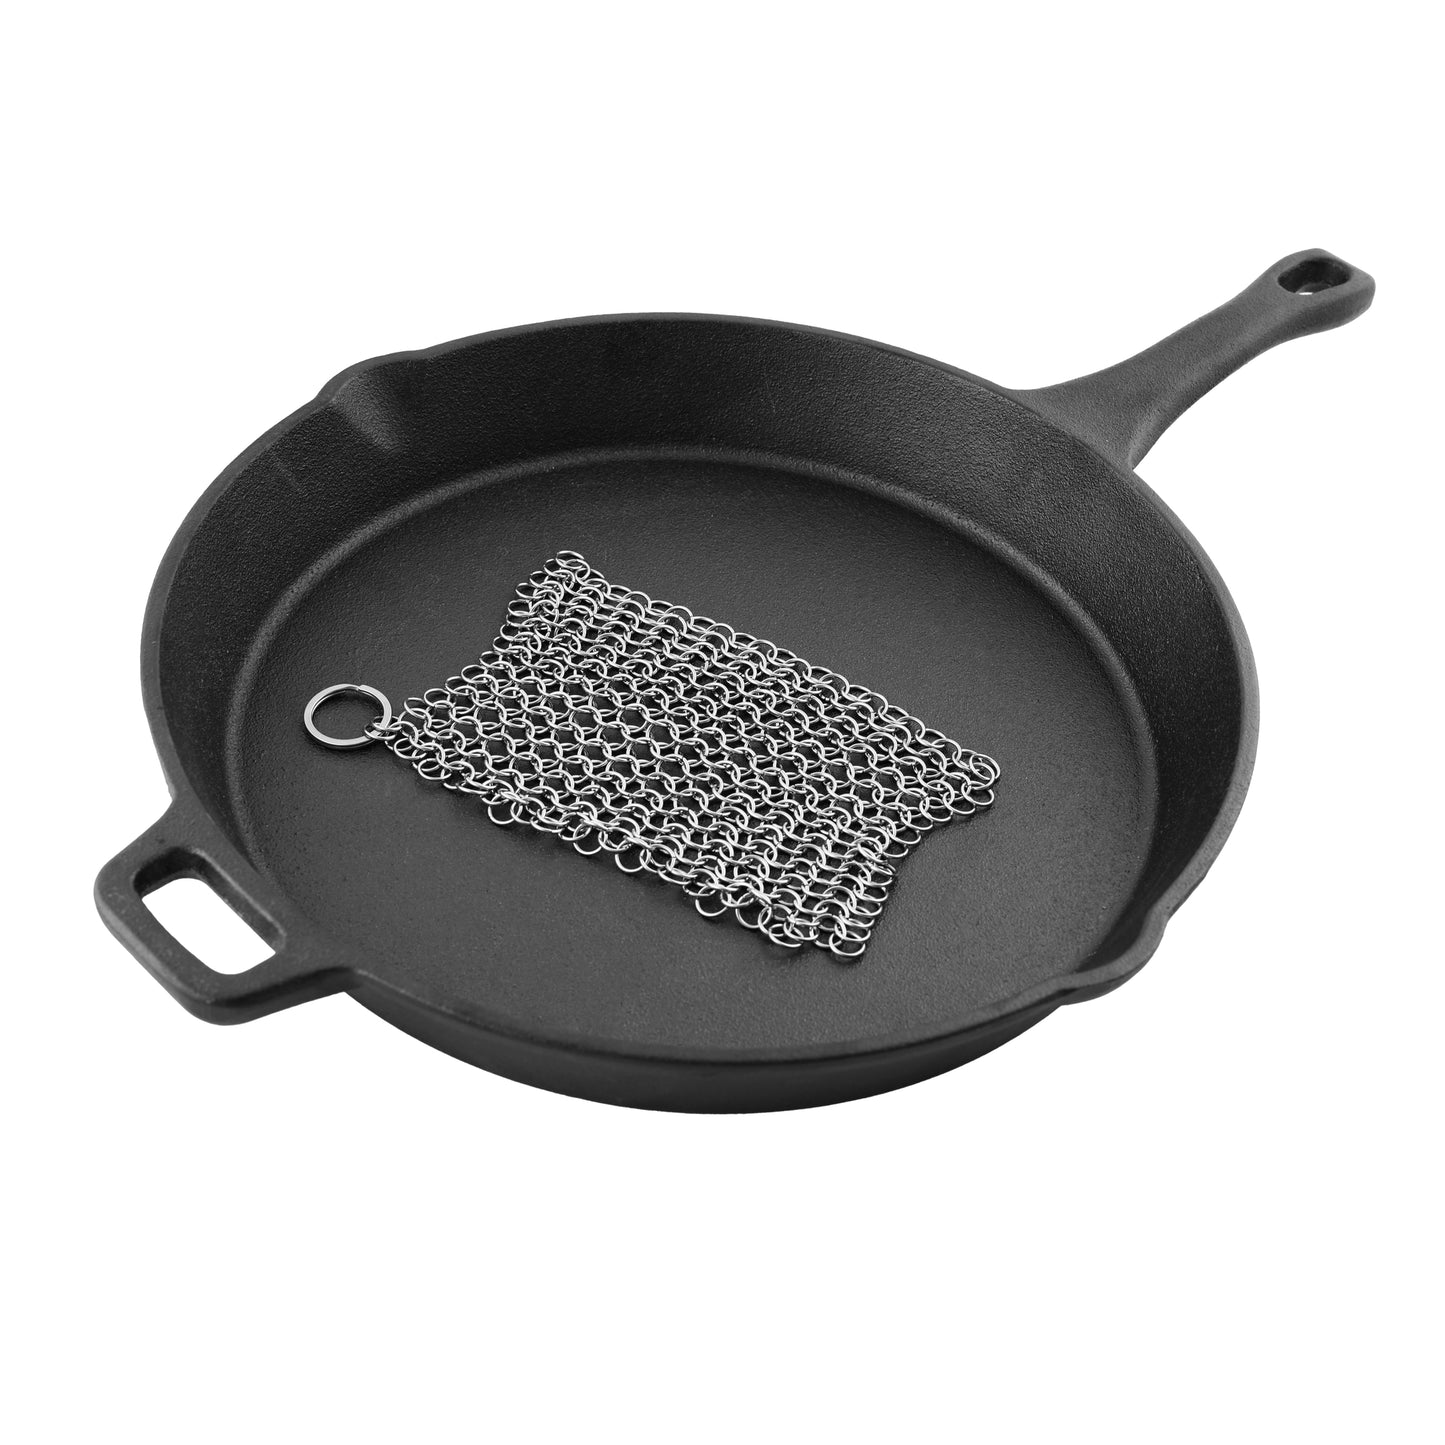 XMMSWDLA Cast Iron Scrubber, Upgraded Chainmail Scrubber for Cast Iron Pan  - Chain Mail Scrubber Cast Iron Sponge - Metal Scrubber Cast Iron Cleaner,,  Dutch Oven Cleaning Chain Scrubber 